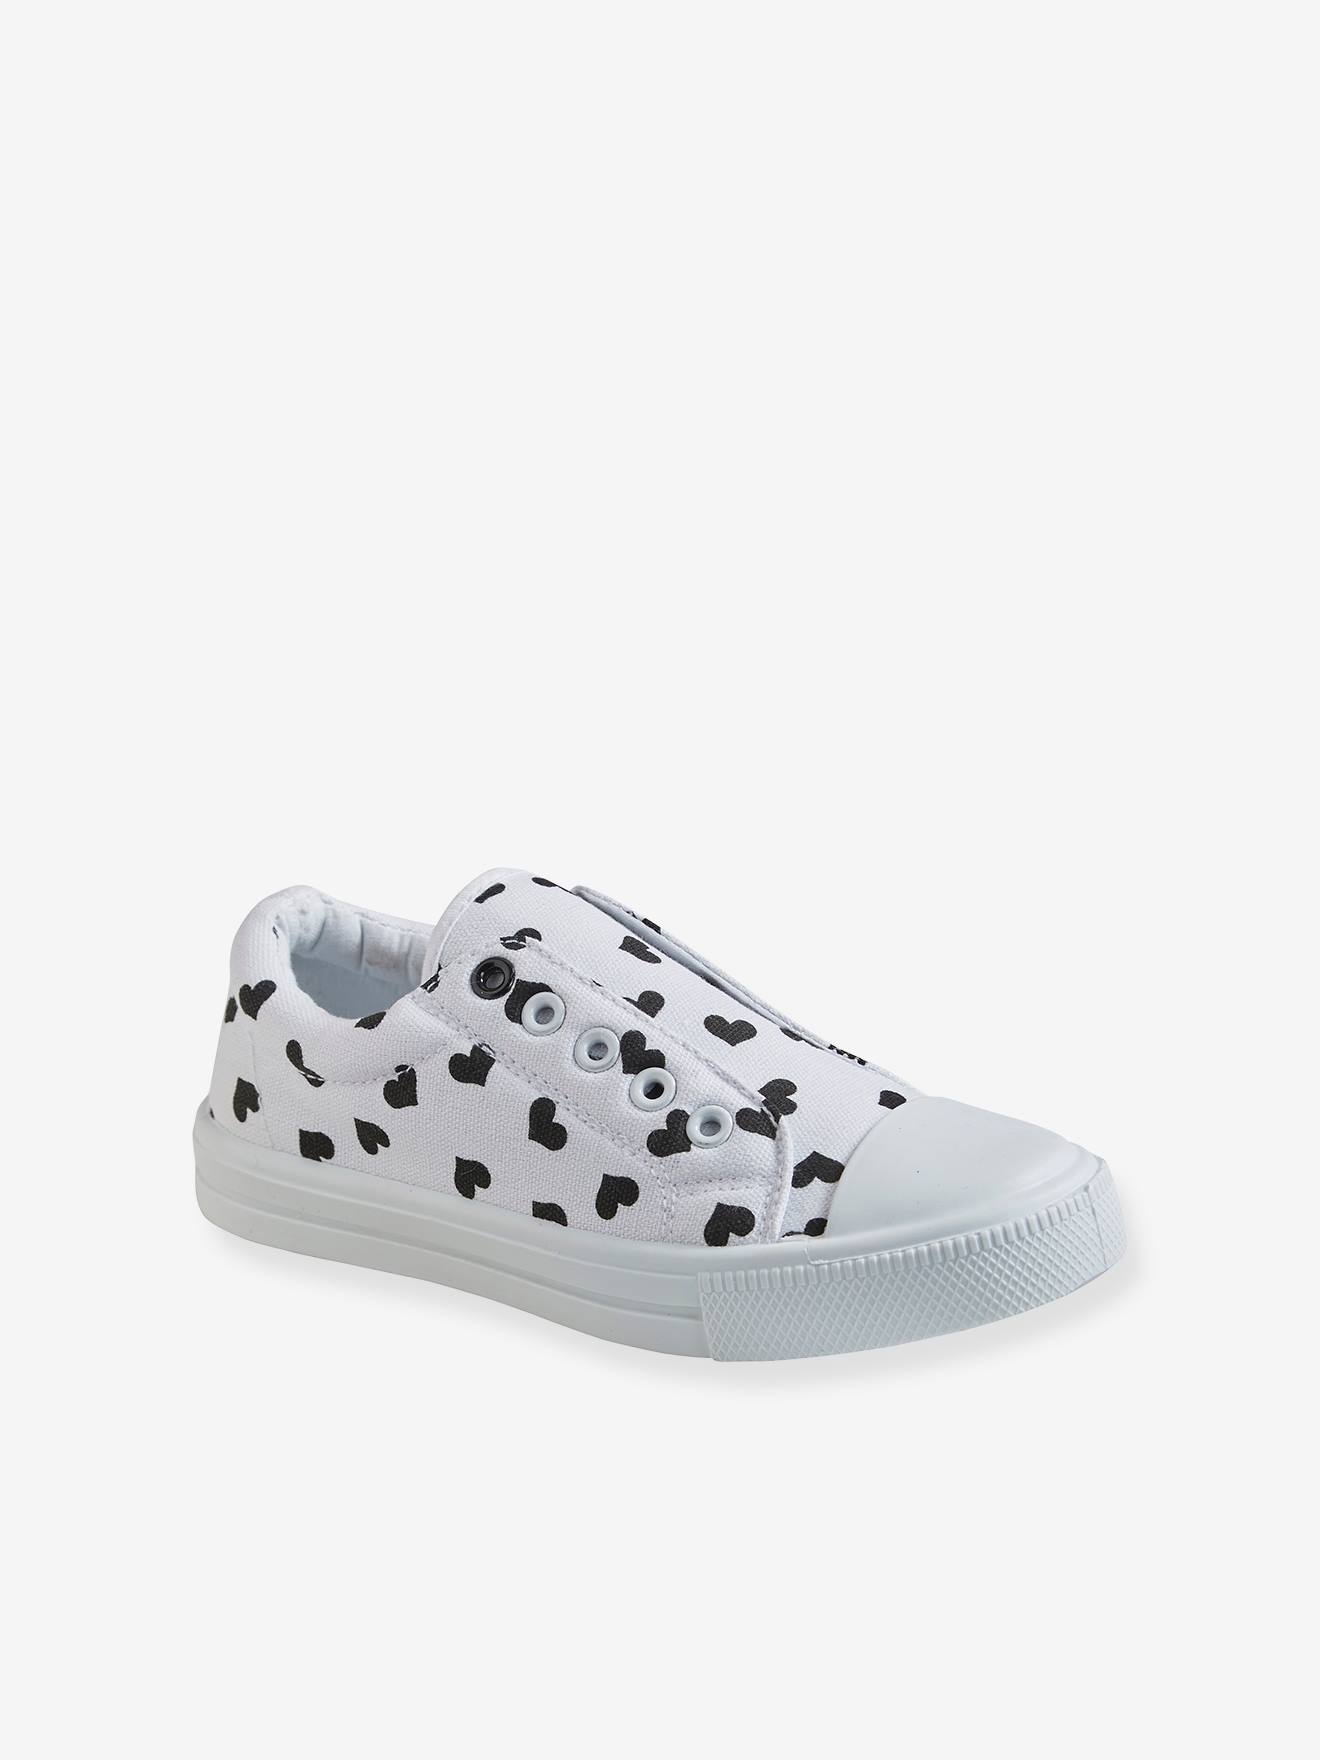 girls canvas trainers